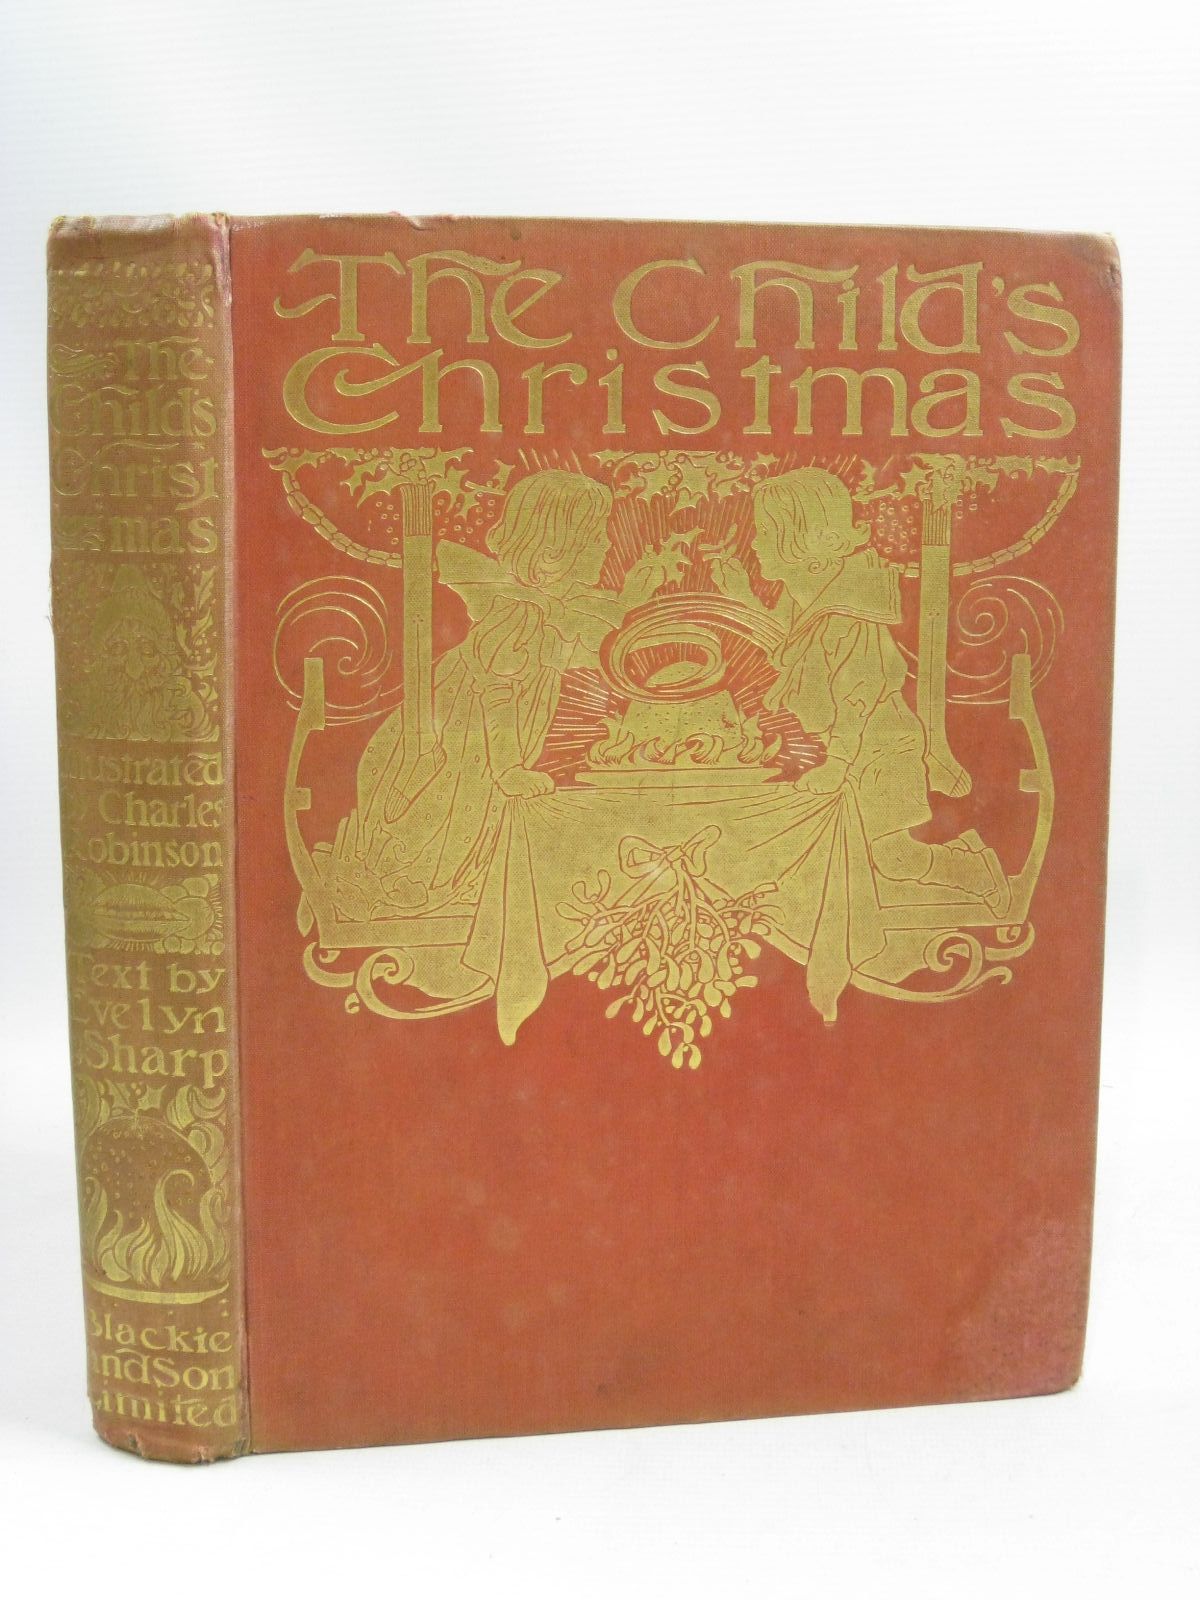 Photo of THE CHILD'S CHRISTMAS written by Sharp, Evelyn illustrated by Robinson, Charles published by Blackie & Son Ltd. (STOCK CODE: 1405238)  for sale by Stella & Rose's Books